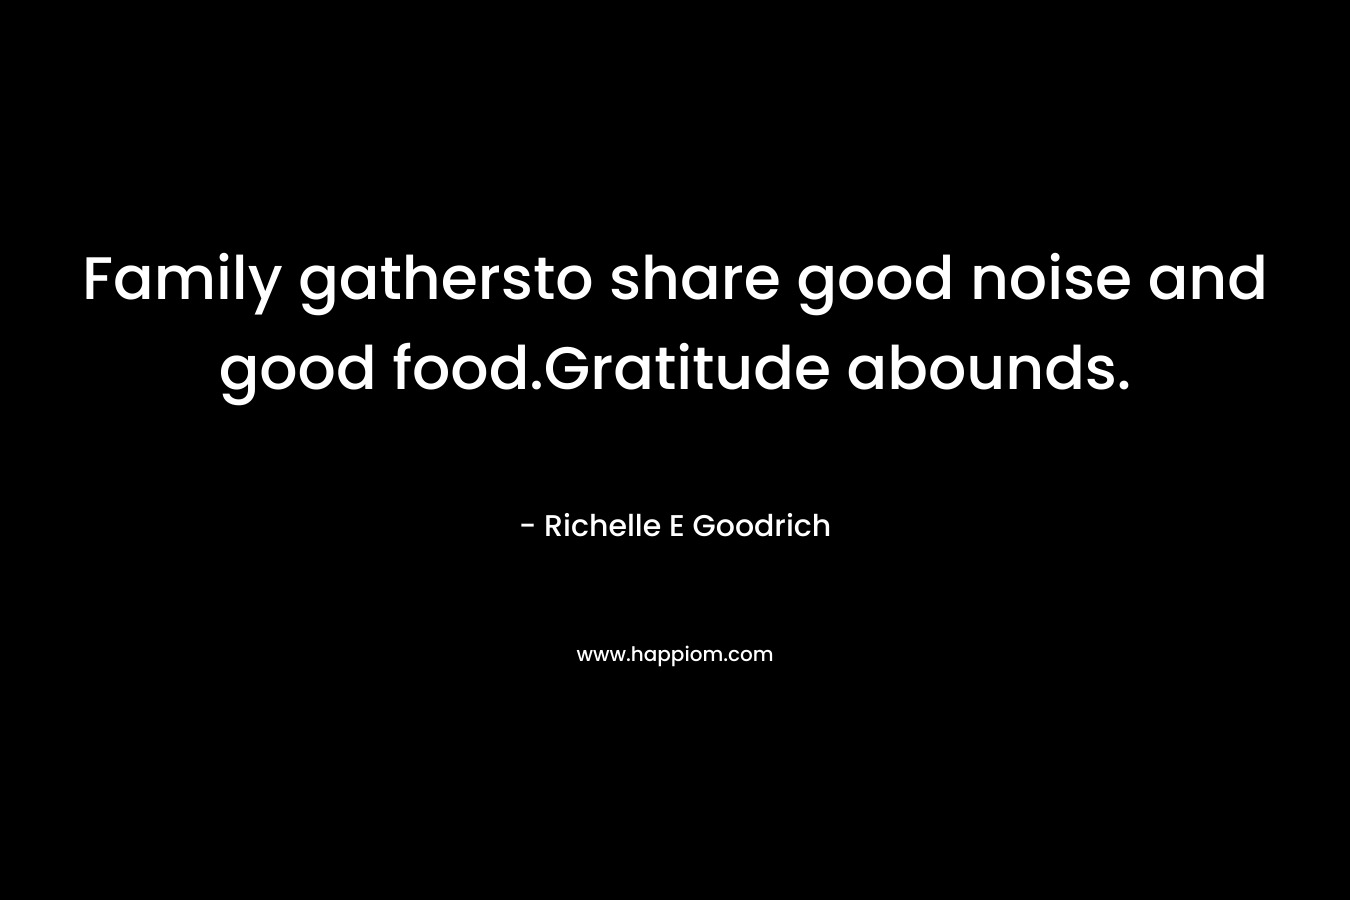 Family gathersto share good noise and good food.Gratitude abounds. – Richelle E Goodrich